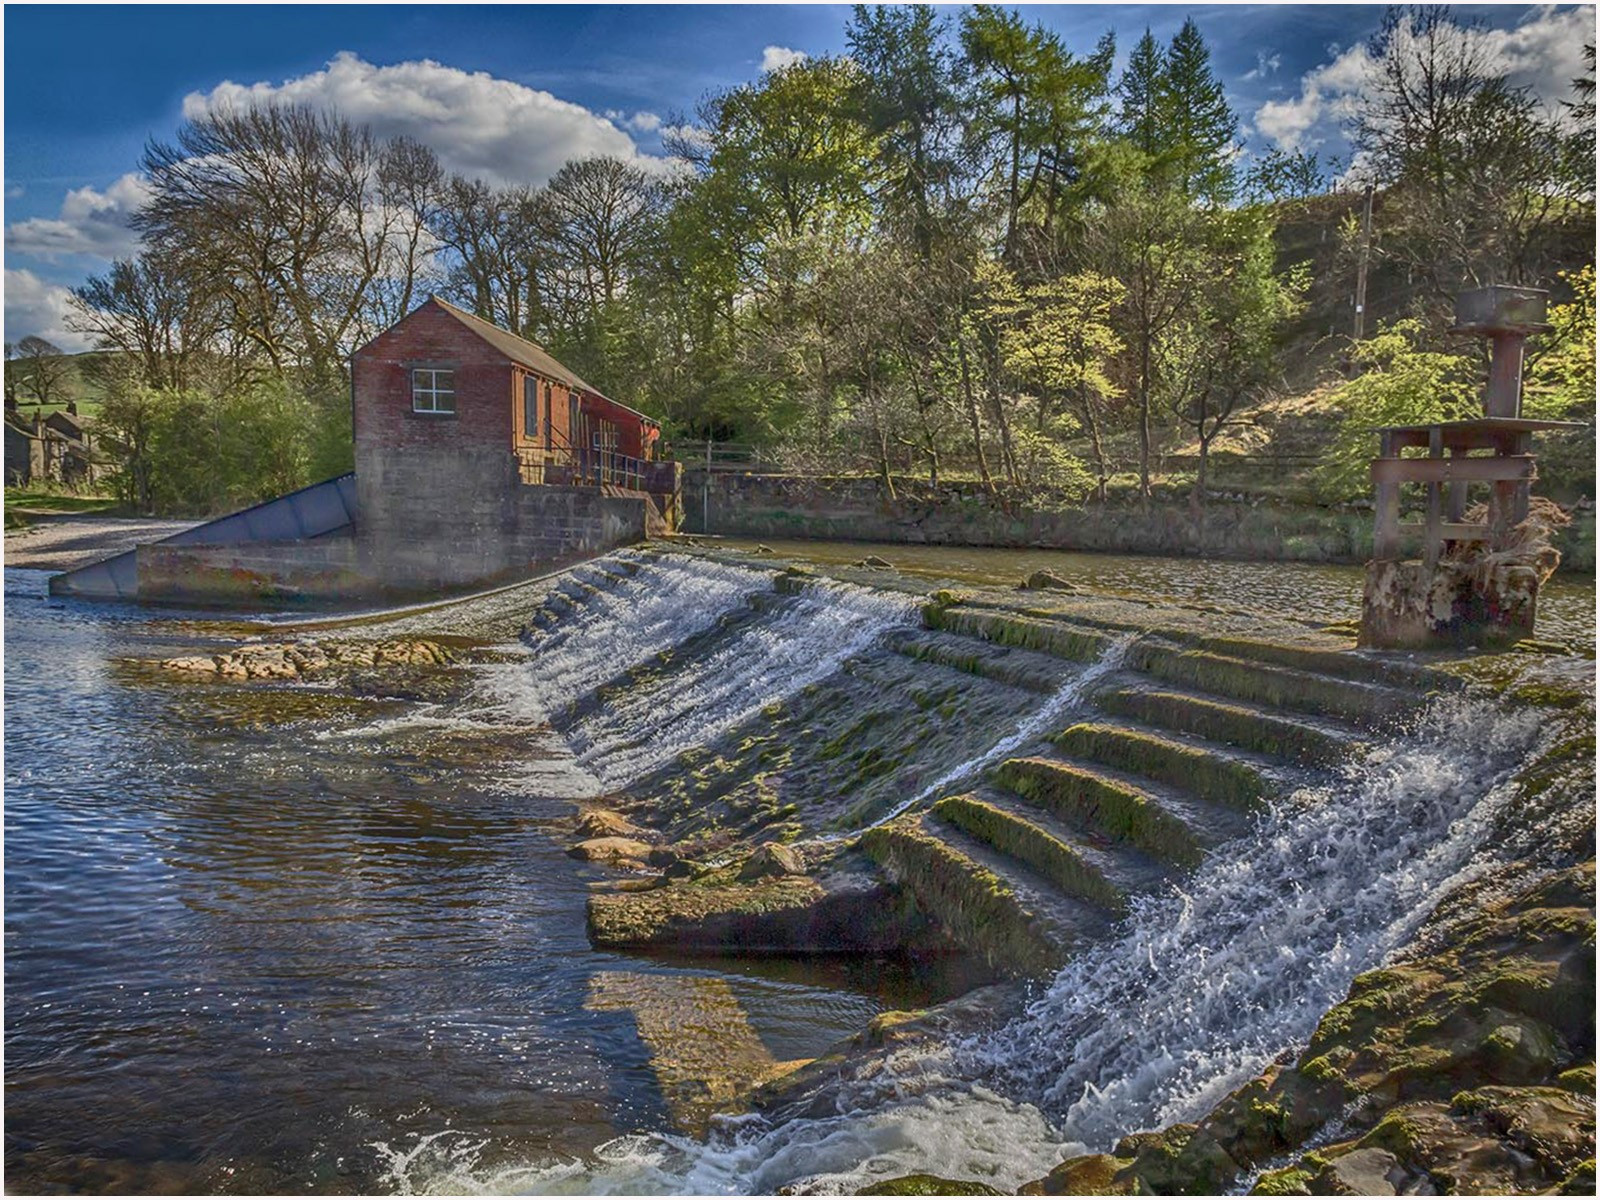 13. River Wharfe Hydro Electric Station